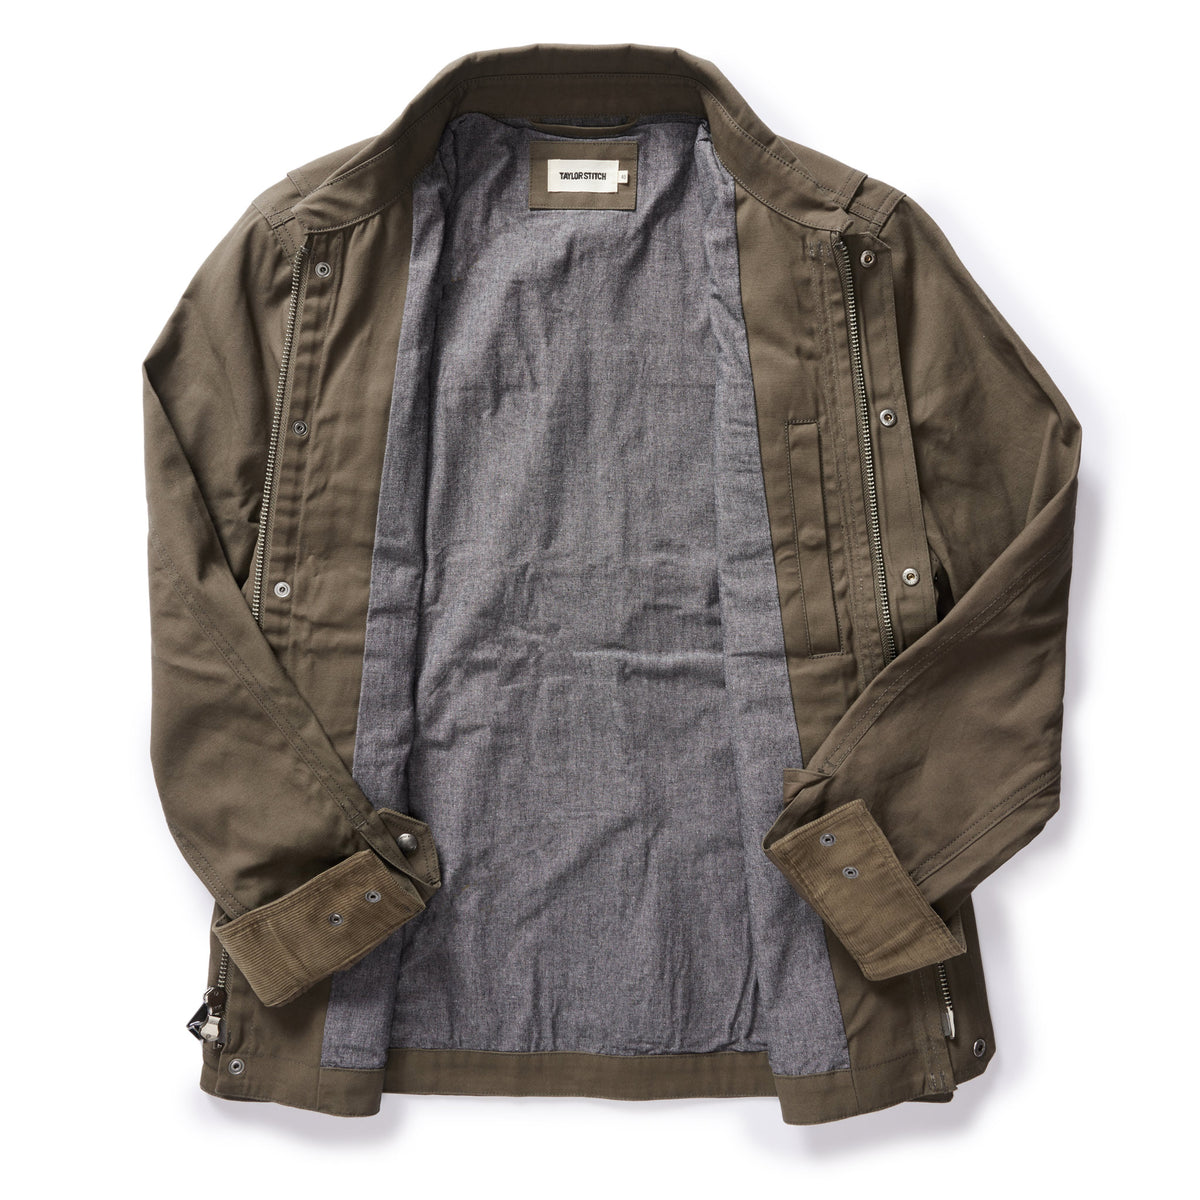 The Pathfinder Jacket Fatigue Olive Dry Wax